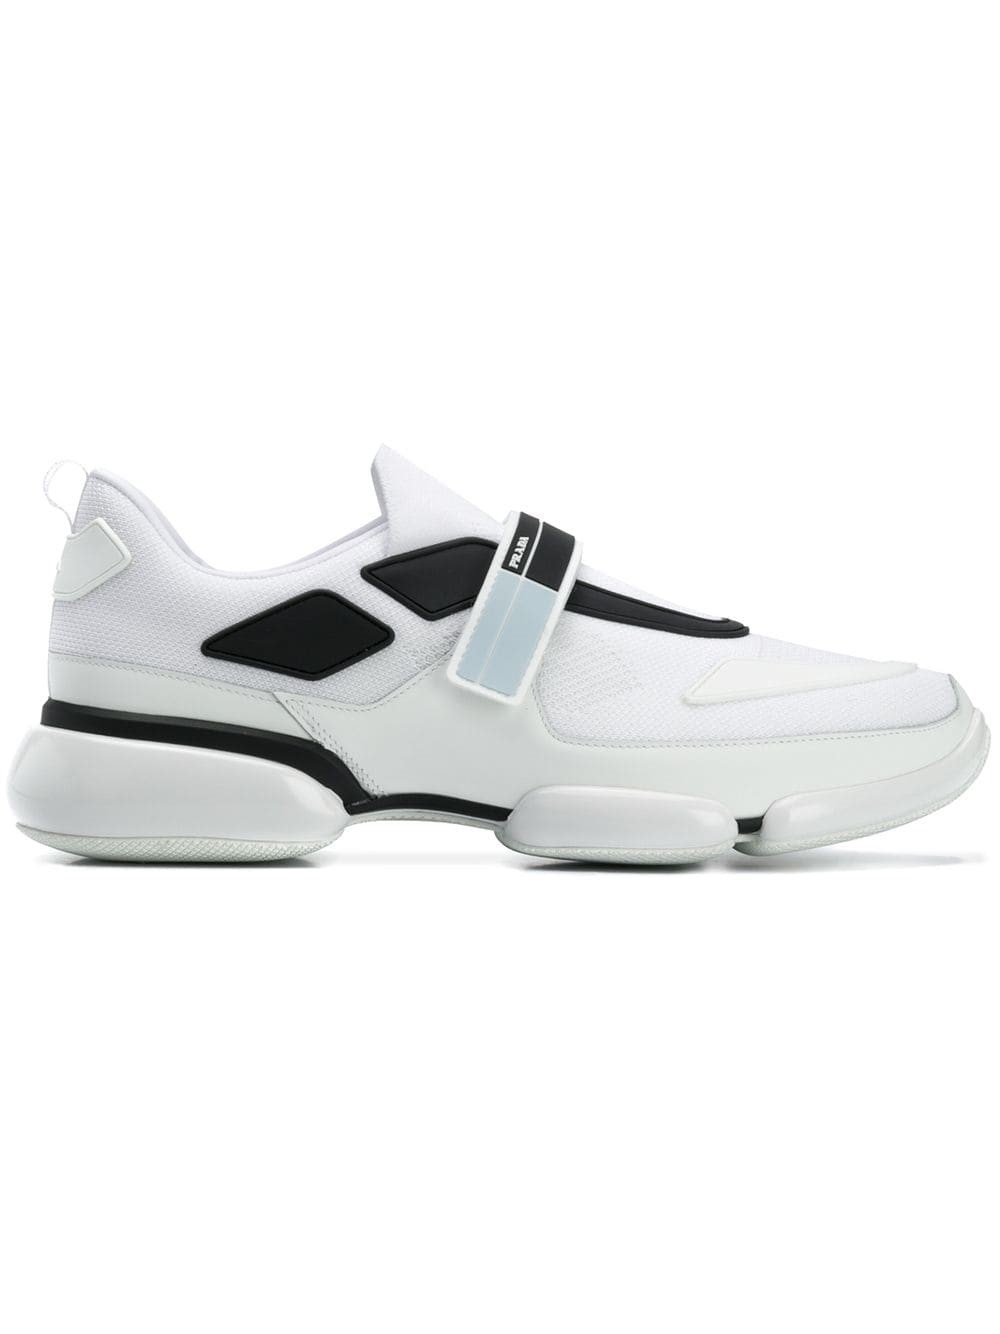 prada CLOUDBUST SNEAKERS available on 